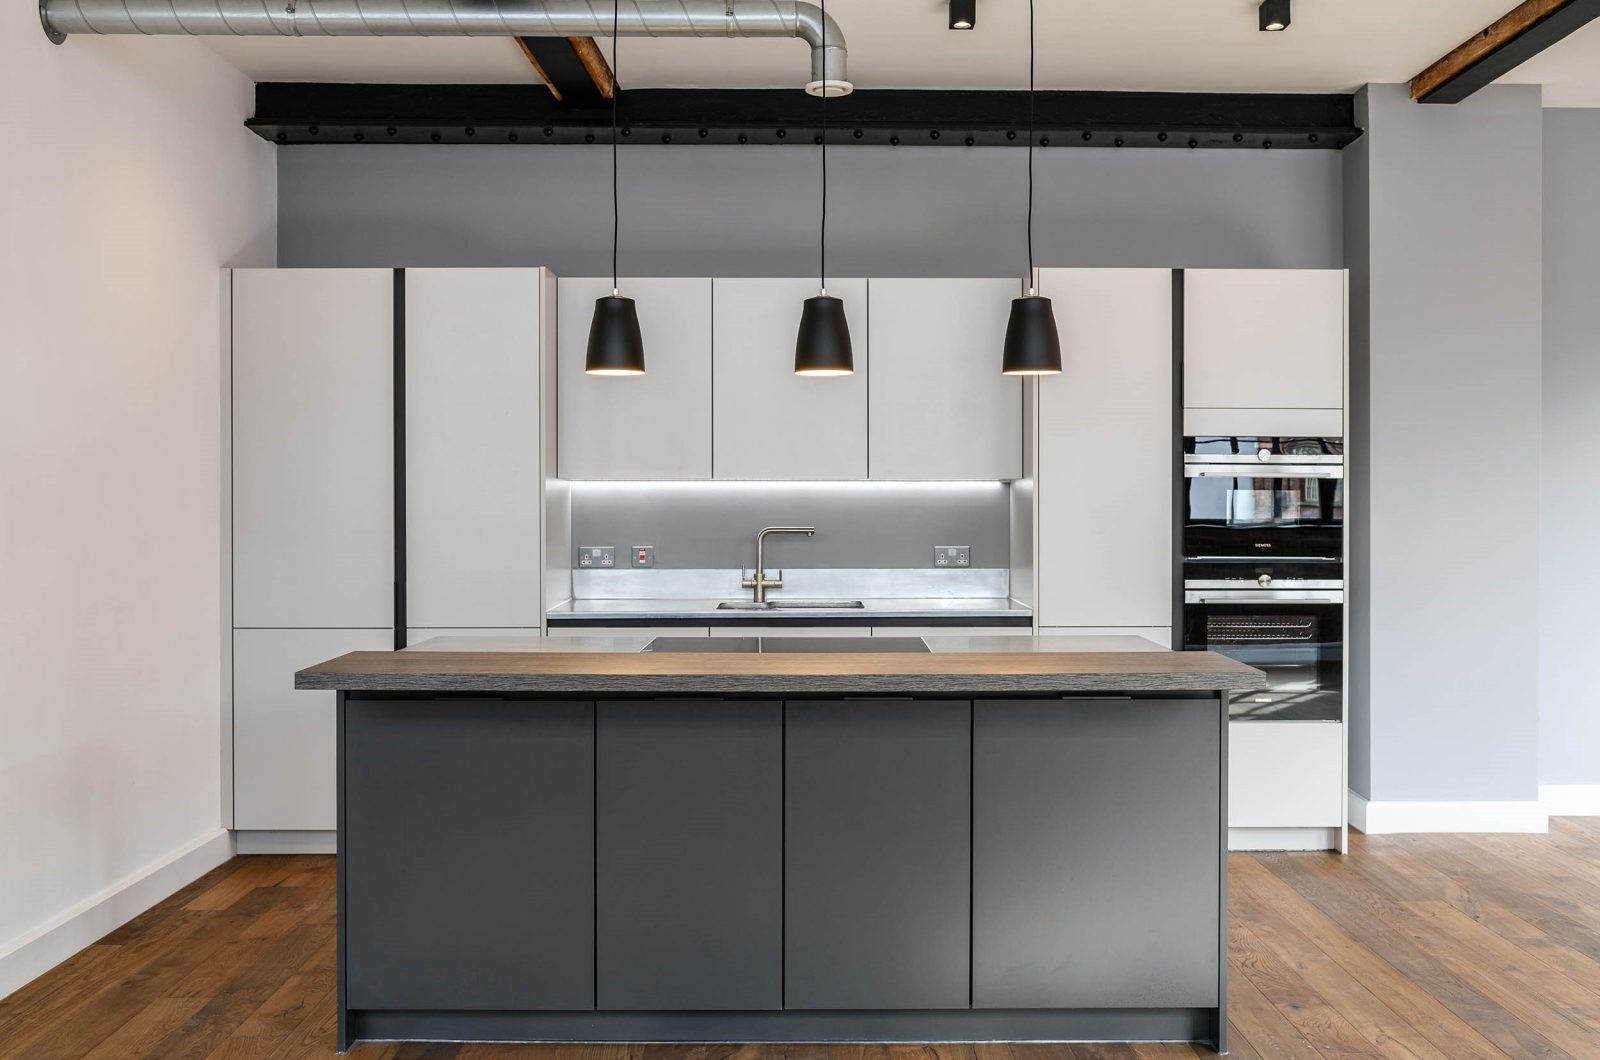 LIV Projekt modern black and grey kitchen with 3 black pendant lights in an industrial style room